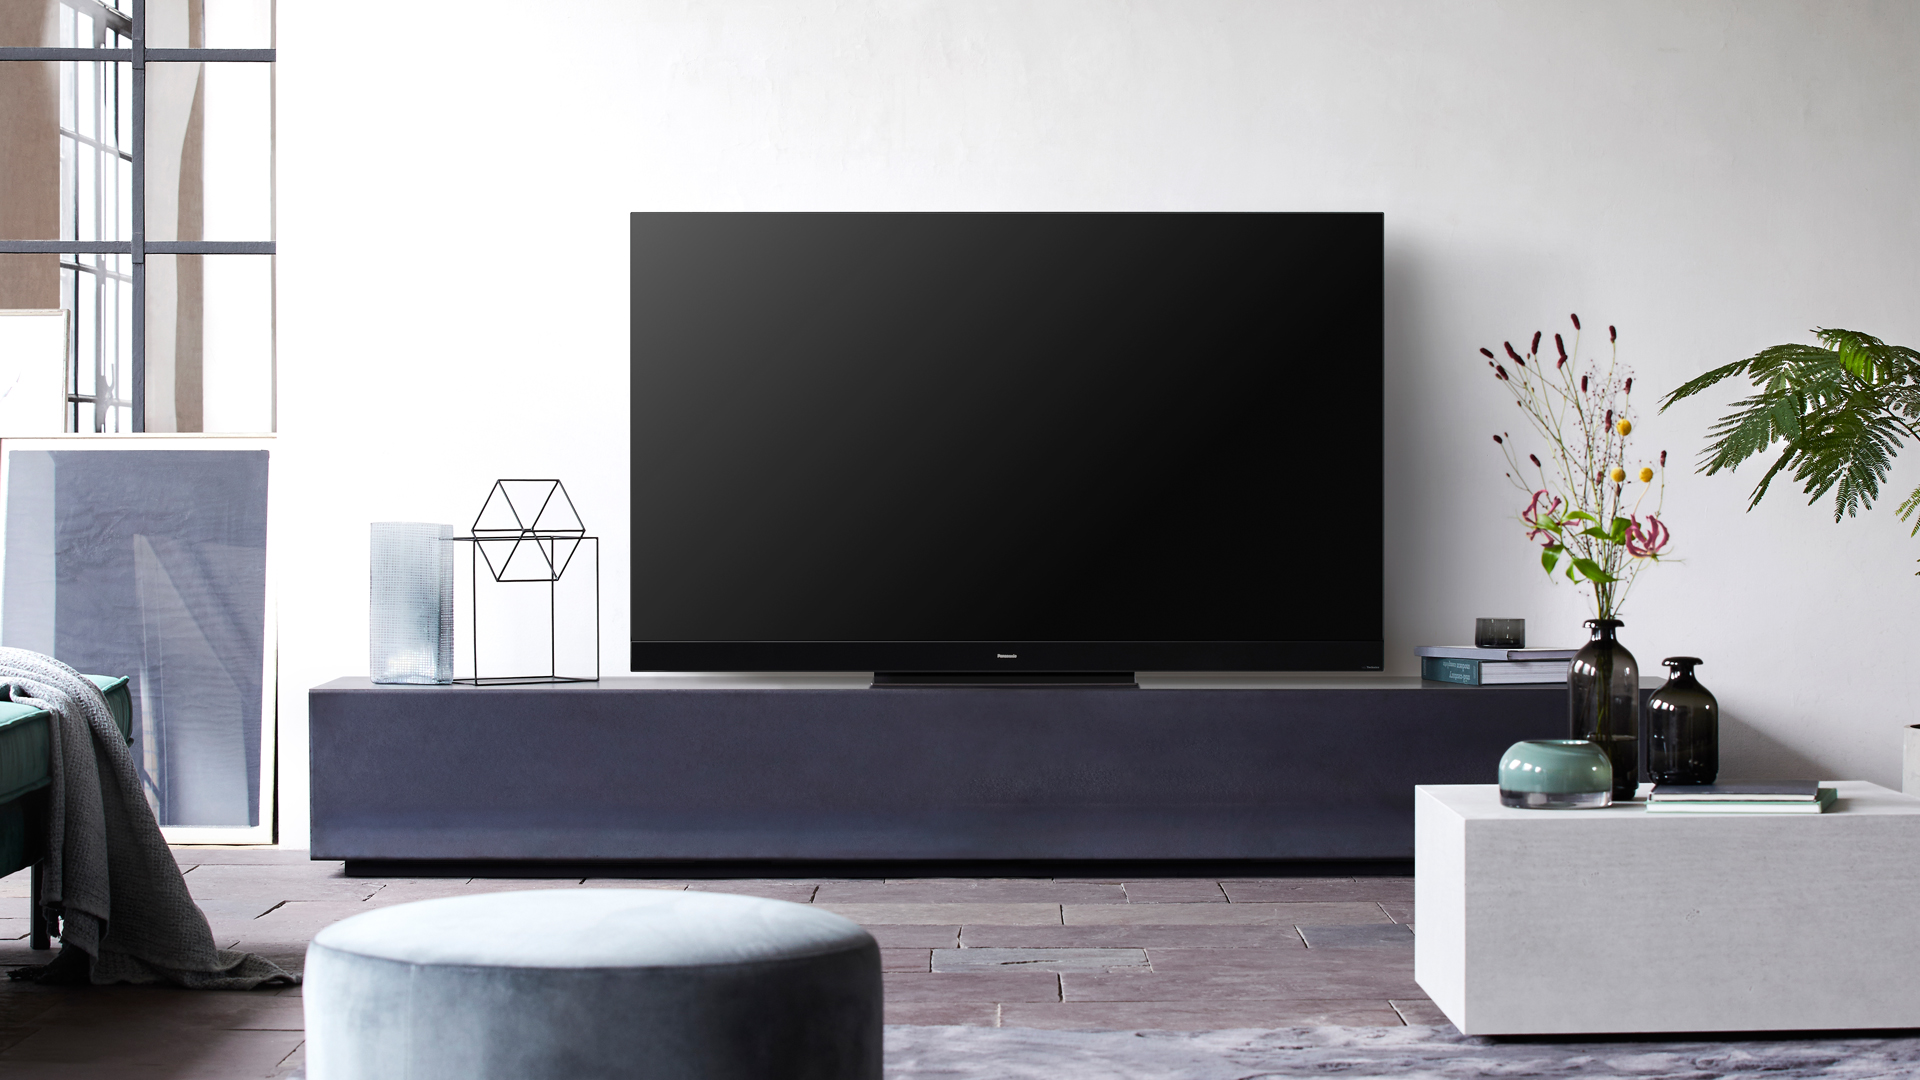 Sony Tv 2020 Every Sony Bravia And Master Series Tv Out This Year Techradar